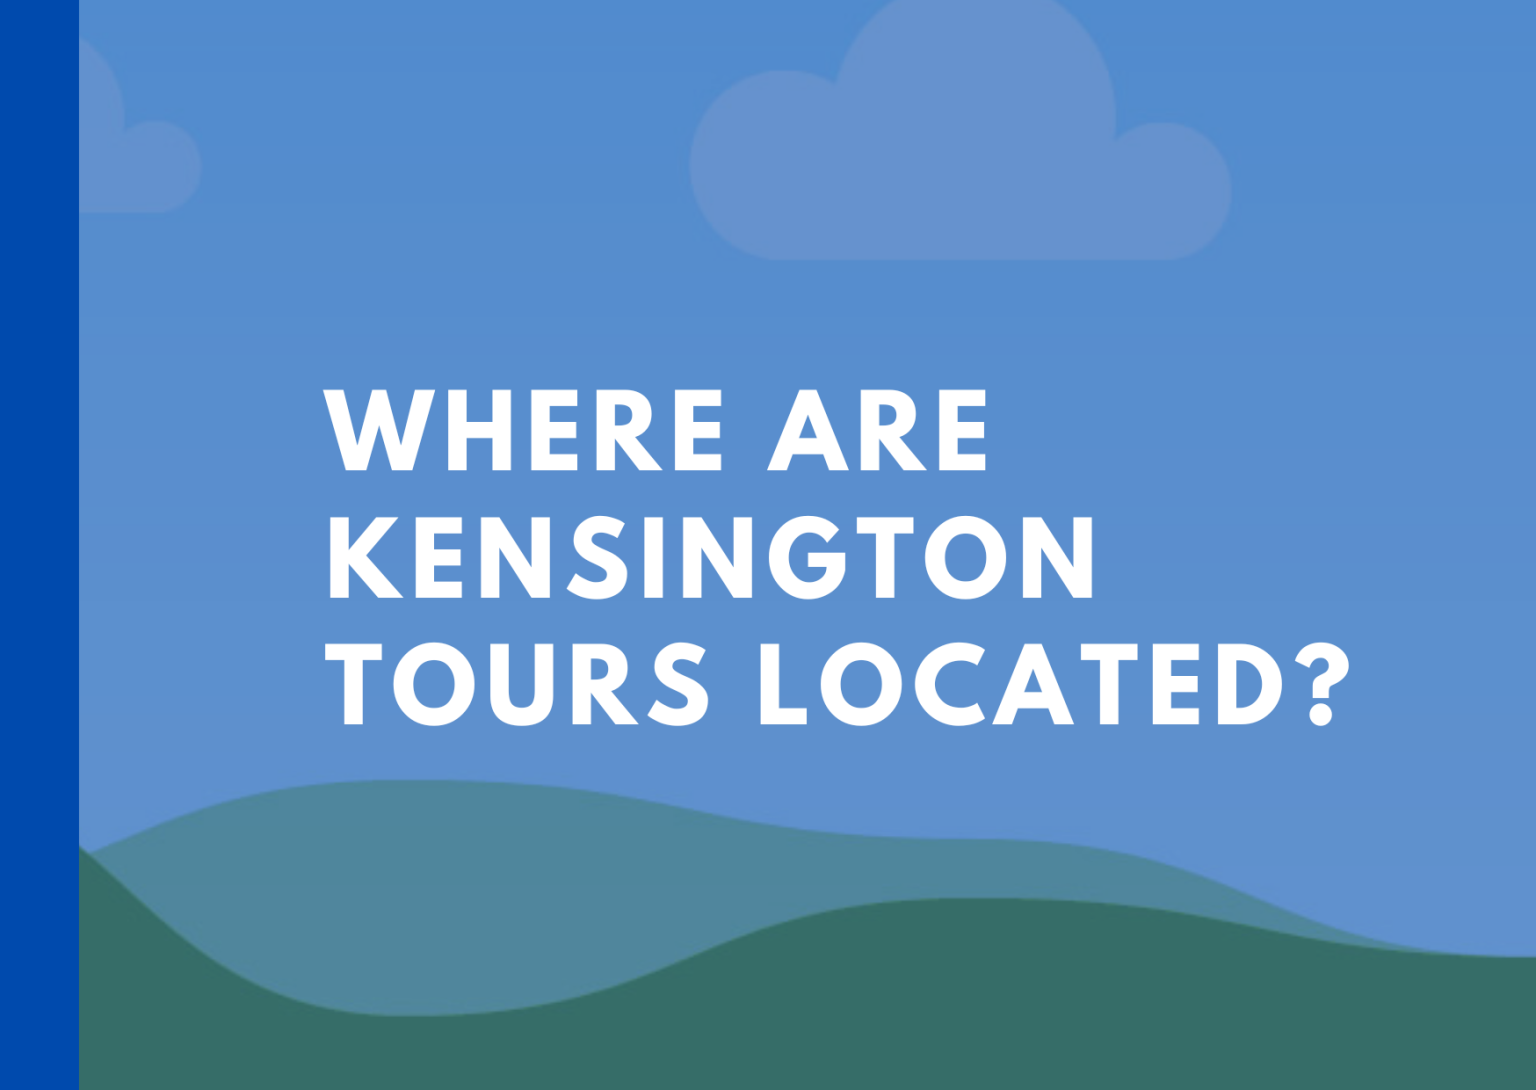 WHERE ARE KENSINGTON TOURS LOCATED?